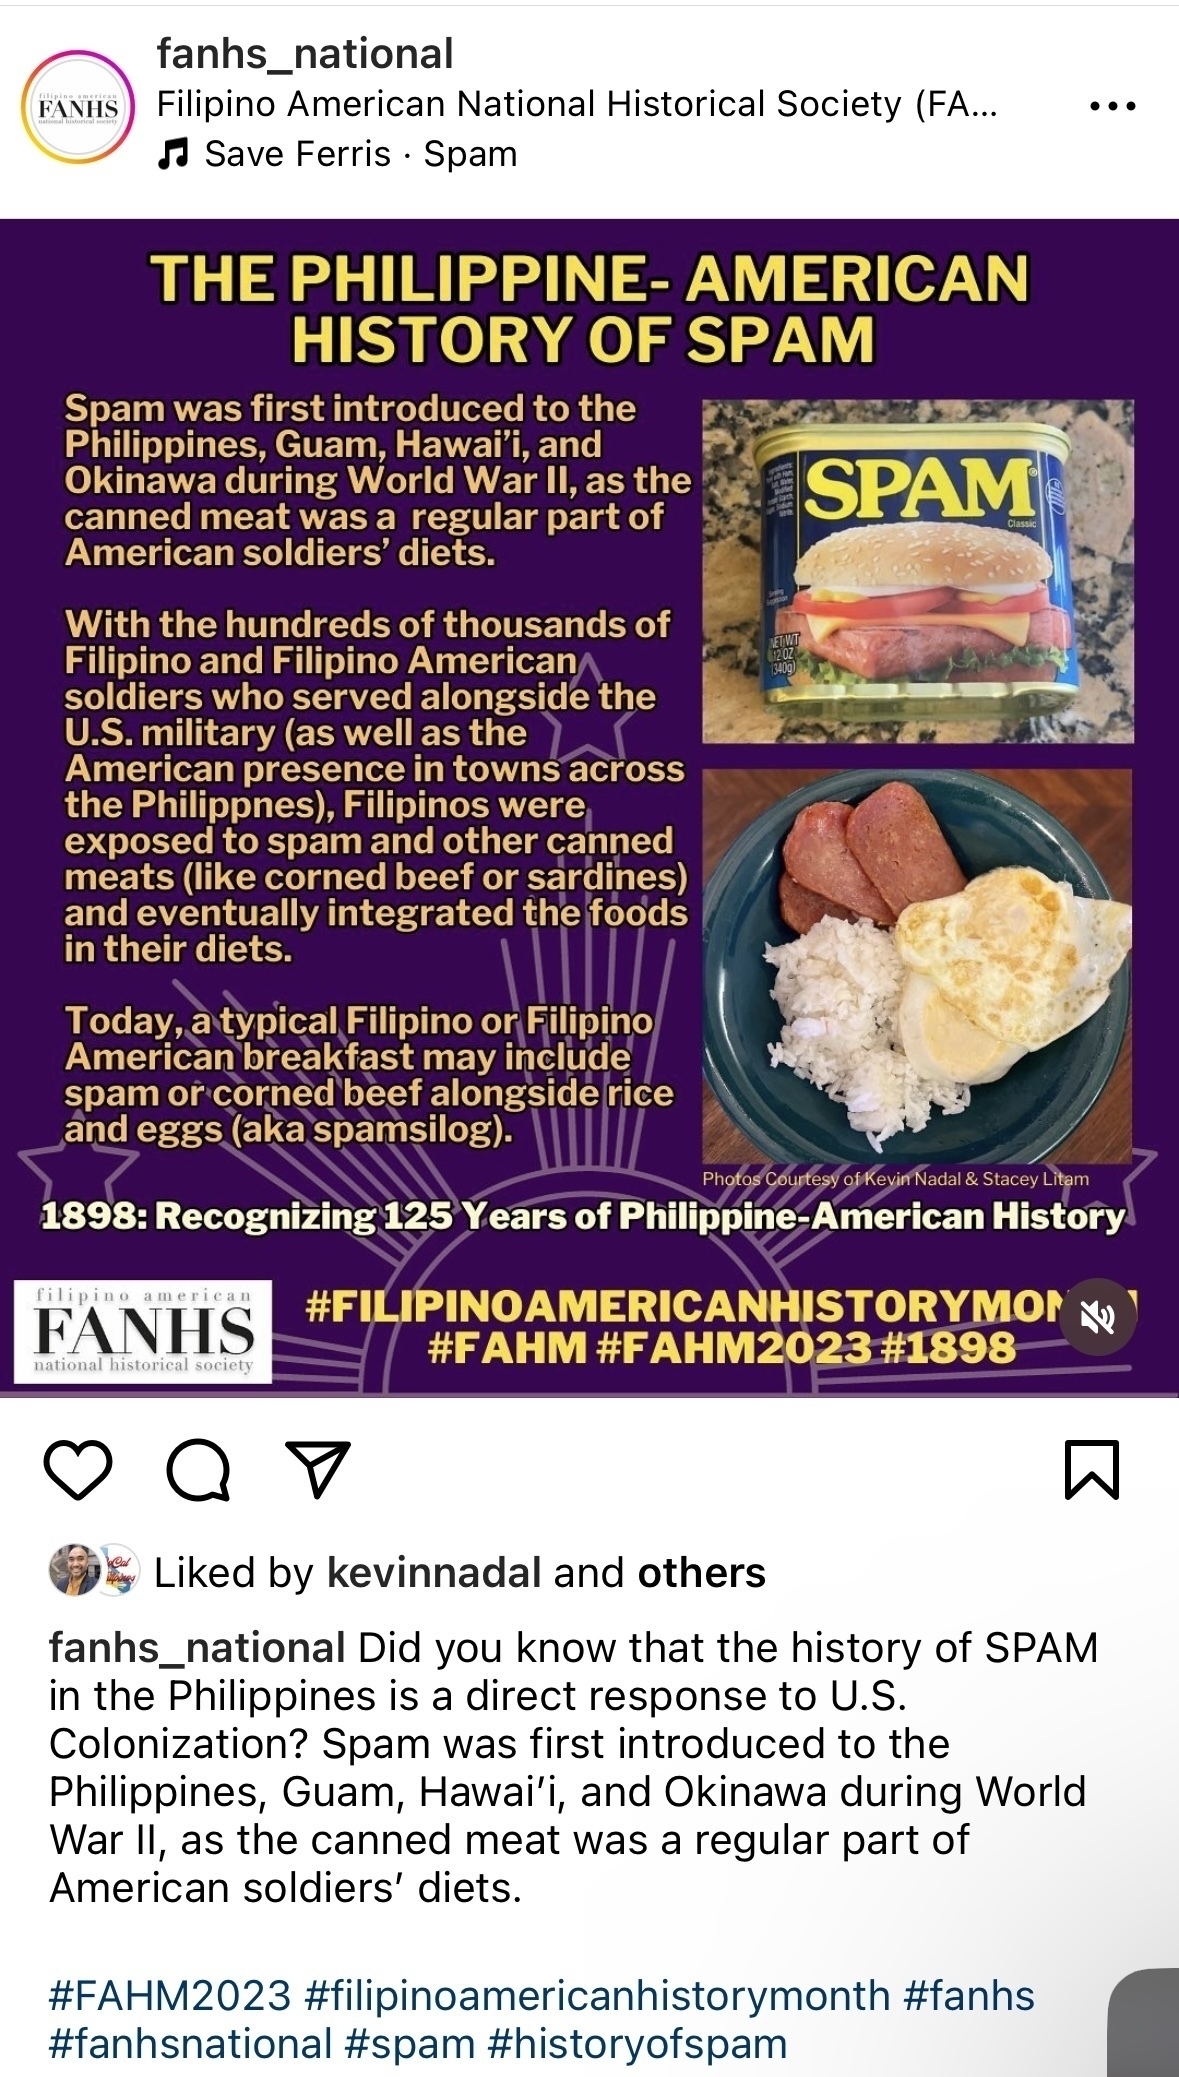 FANHS&10;fanhs_national&10;Filipino American National Historical Society (FA...&10;• Save Ferris • Spam&10;THE PHILIPPINE- AMERICAN&10;HISTORY OF SPAM&10;Spam was first introduced to the Philippines, Guam, Hawaii, and Okinawa during World War II, as the canned meat was a regular part of&10;SPAM&10;American soldiers' diets.&10;With the hundreds of thousands of Filipino and Filipino American soldiers who served alongside the&10;U.S. military (as well as the&10;American presence in towns across the Philippnes), Filipinos were exposed to spam and other canned meats (like corned beef or sardines) and eventually integrated the foods in their diets.&10;Today, a typical Filipino or Filipino American breakfast may include spam or corned beef alongside rice and eggs (aka spamsilog).&10;Photos Courtesy of Kevin Nadal & Stacey Litam&10;1898: Recognizing 125 Years of Philippine-American History&10;american&10;FANHS&10;national historical society&10;#FILIPINOAMERICANHISTORYMON&10;&10;#FAHM #FAHM2023#1898&10;Liked by kevinnadal and others&10;fanhs_national Did you know that the history of SPAM in the Philippines is a direct response to U.S.&10;Colonization? Spam was first introduced to the Philippines, Guam, Hawai'i, and Okinawa during World War Il, as the canned meat was a regular part of American soldiers' diets.&10;#FAHM2023 #filipinoamericanhistorymonth #fanhs #fanhsnational #spam #historyofspam